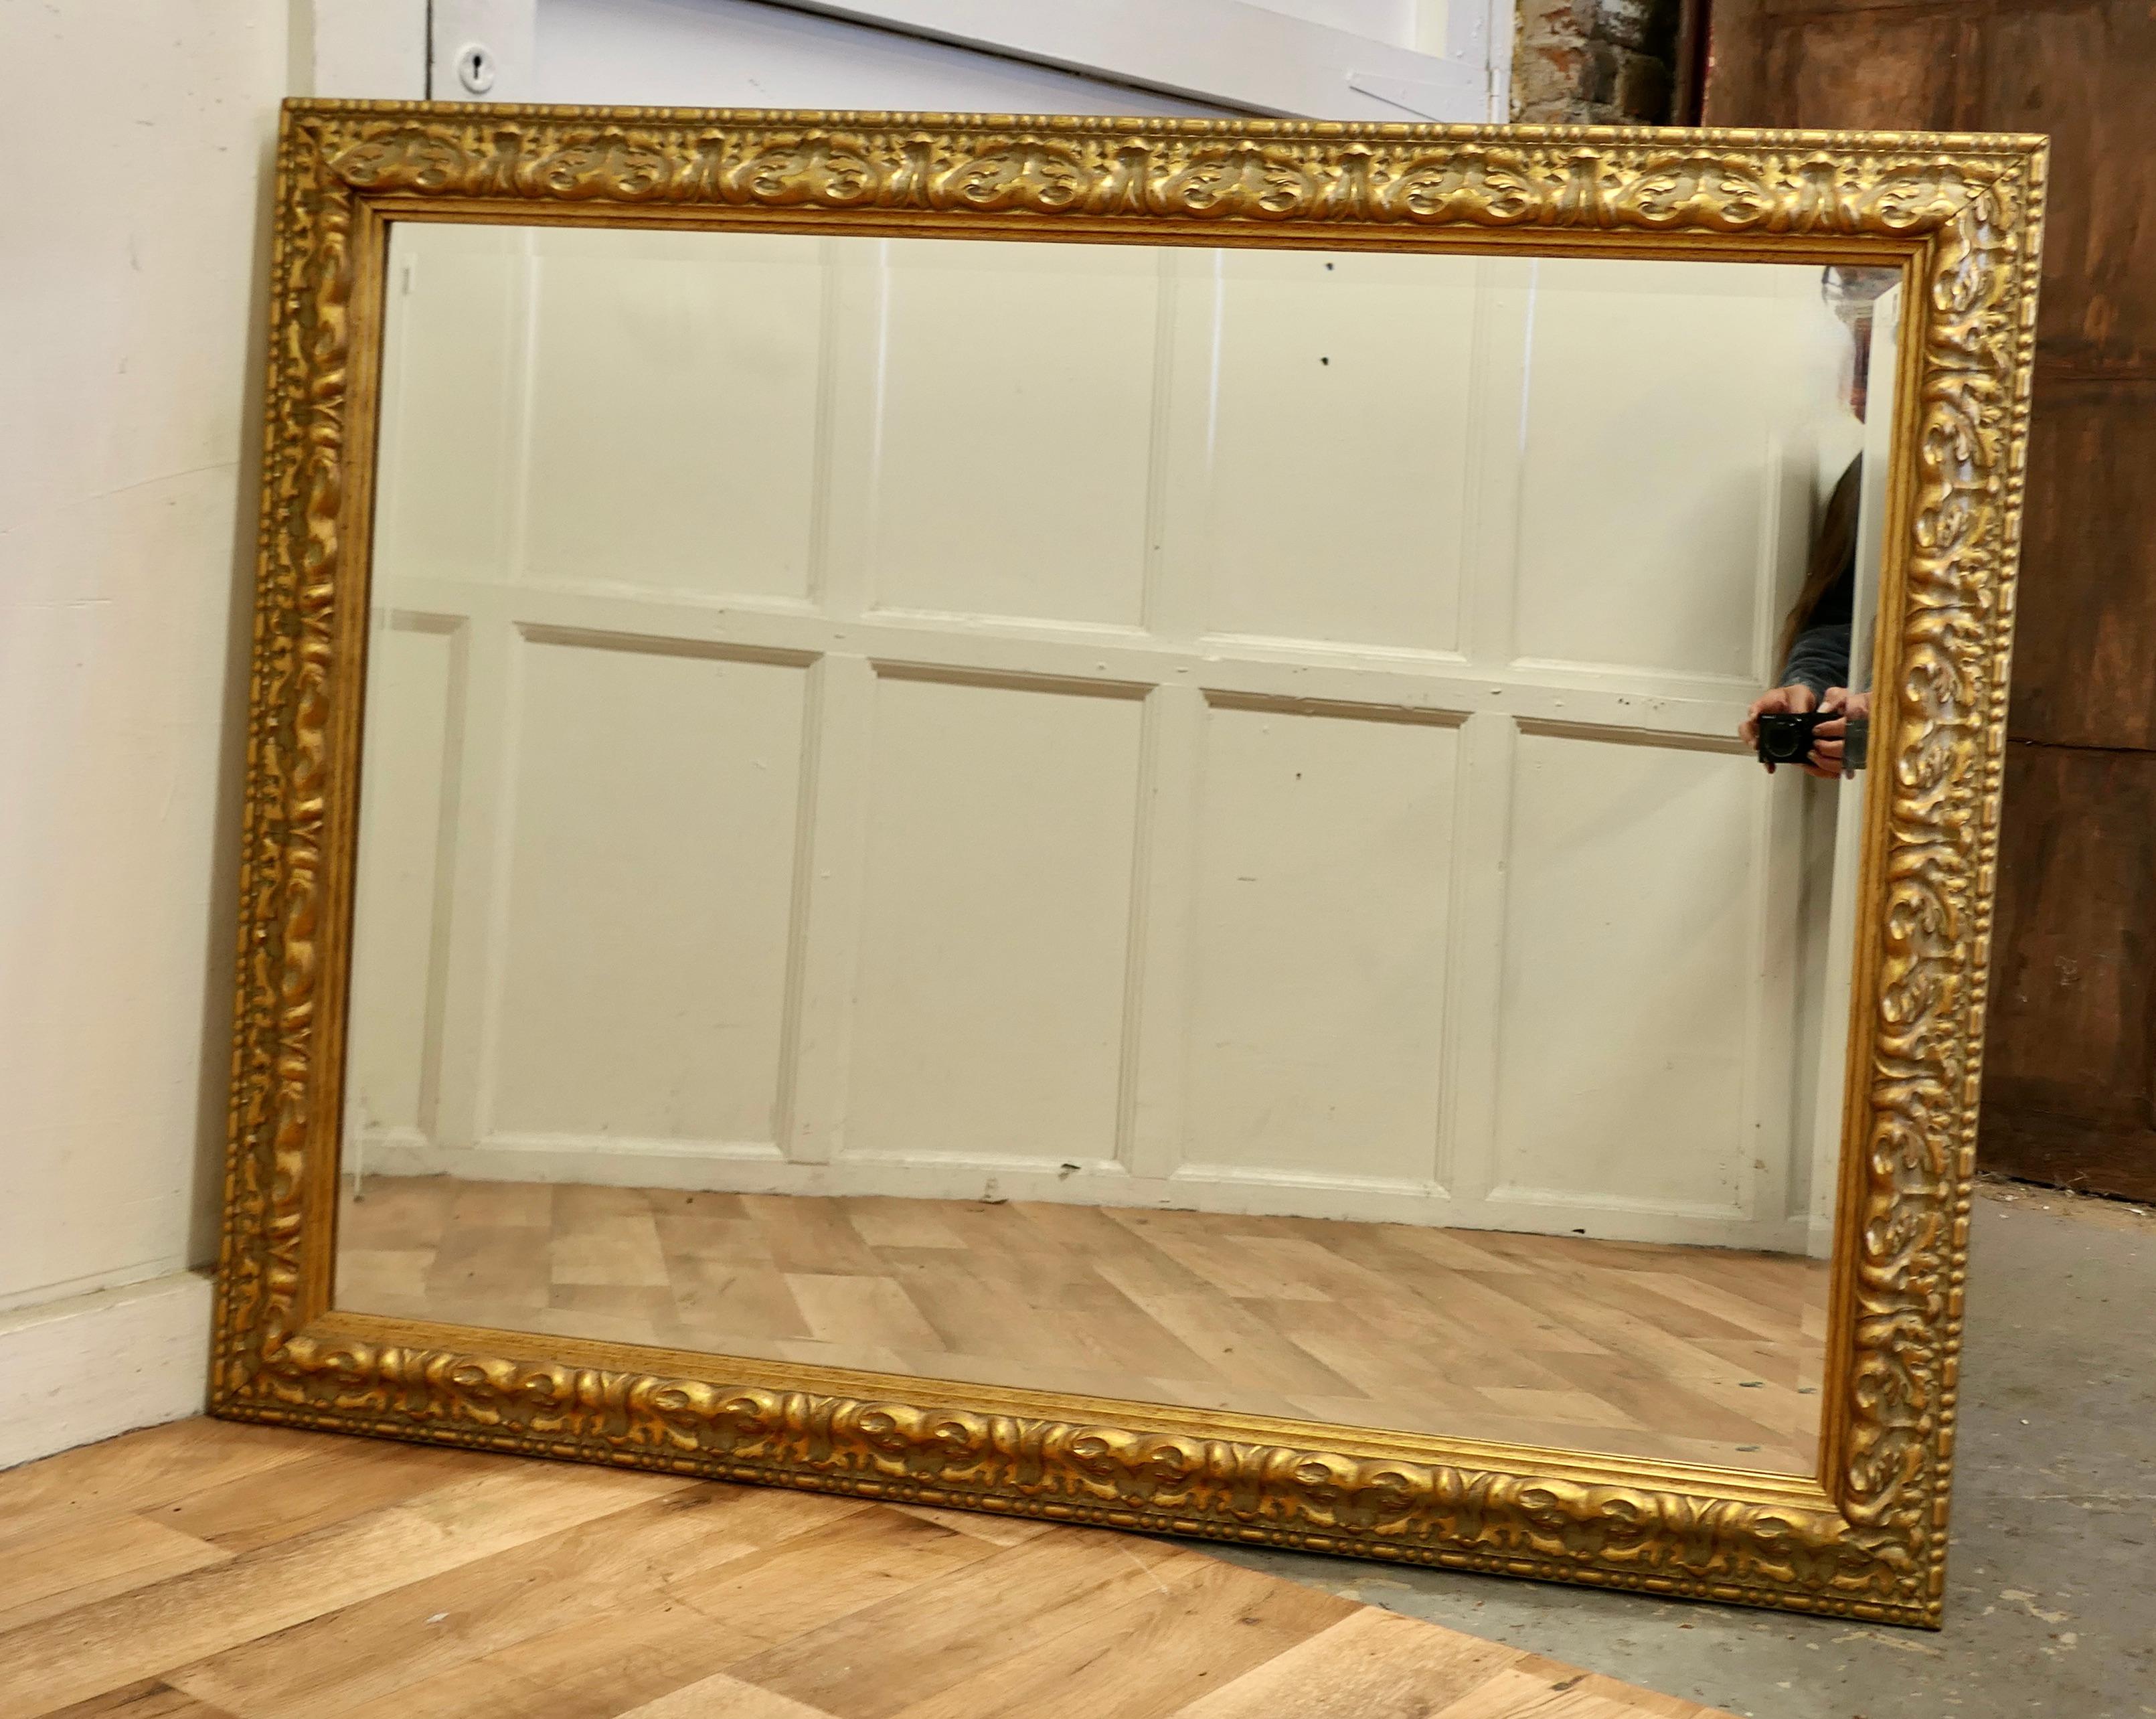 Lovely Rectangular Gilt Rococo Wall Mirror

The mirror is in a Gilt Rococo Style Frame, it is rectangular in shape with a 3.5” wide profusely decorated frame
This is a beautiful and quite elaborate piece, the glass and frame are both in good